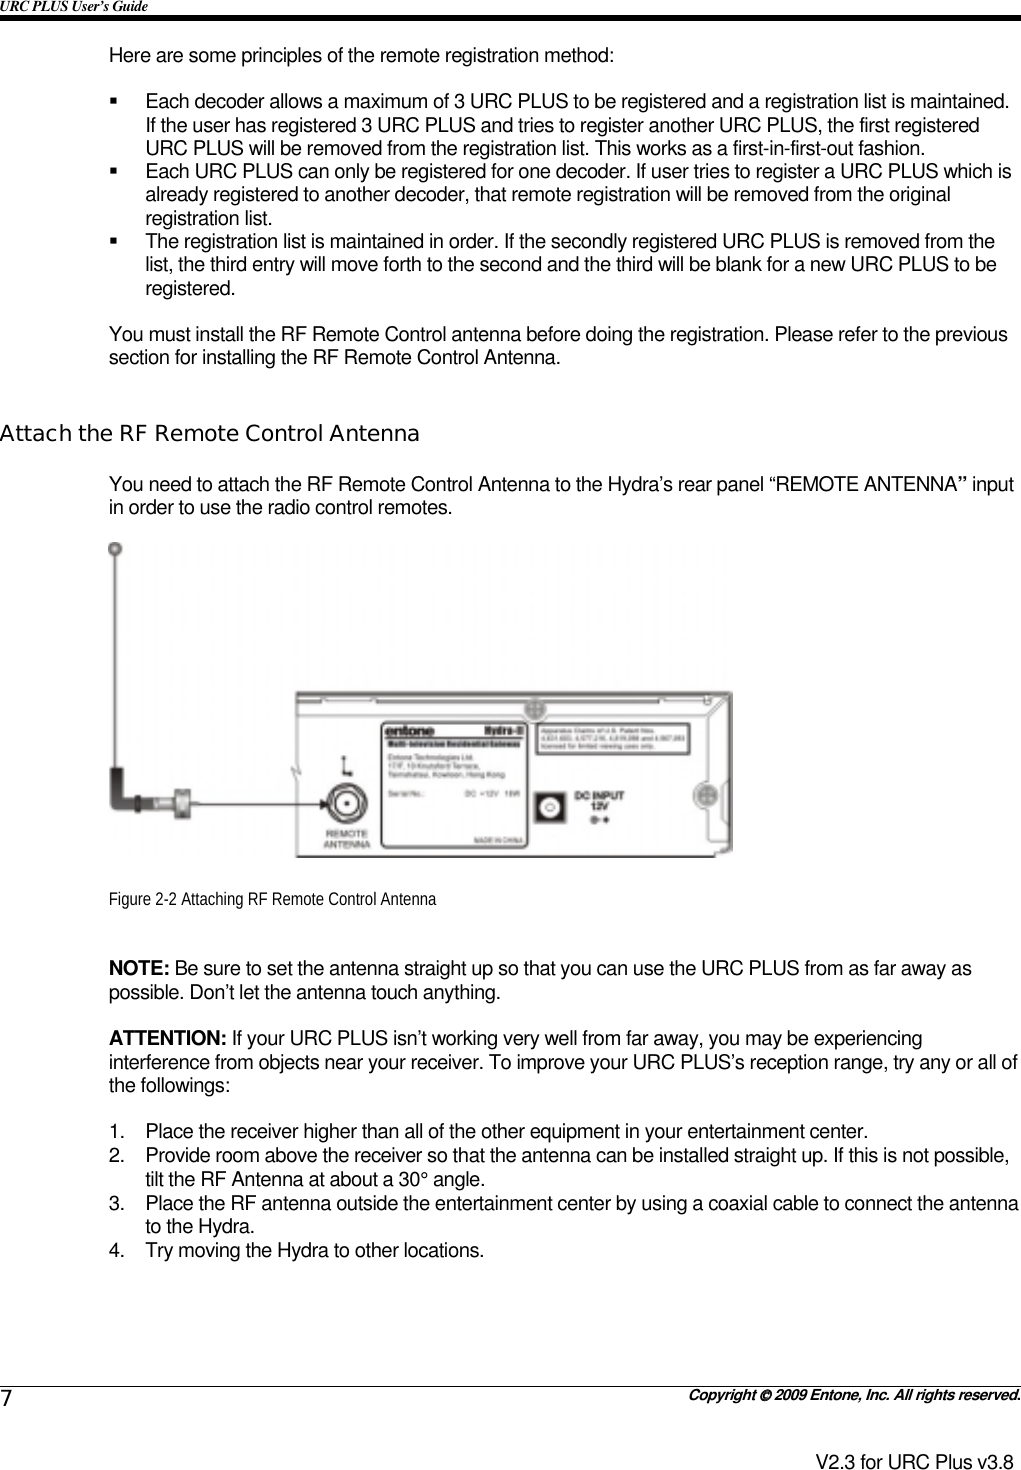 URC PLUS User’s Guide   Copyright  2009 Entone, Inc. All rights reserved. 7 V2.3 for URC Plus v3.8 Here are some principles of the remote registration method:    Each decoder allows a maximum of 3 URC PLUS to be registered and a registration list is maintained. If the user has registered 3 URC PLUS and tries to register another URC PLUS, the first registered URC PLUS will be removed from the registration list. This works as a first-in-first-out fashion.   Each URC PLUS can only be registered for one decoder. If user tries to register a URC PLUS which is already registered to another decoder, that remote registration will be removed from the original registration list.   The registration list is maintained in order. If the secondly registered URC PLUS is removed from the list, the third entry will move forth to the second and the third will be blank for a new URC PLUS to be registered.  You must install the RF Remote Control antenna before doing the registration. Please refer to the previous section for installing the RF Remote Control Antenna.  Attach the RF Remote Control Antenna You need to attach the RF Remote Control Antenna to the Hydra’s rear panel “REMOTE ANTENNA” input in order to use the radio control remotes.     Figure 2-2 Attaching RF Remote Control Antenna  NOTE: Be sure to set the antenna straight up so that you can use the URC PLUS from as far away as possible. Don’t let the antenna touch anything.  ATTENTION: If your URC PLUS isn’t working very well from far away, you may be experiencing interference from objects near your receiver. To improve your URC PLUS’s reception range, try any or all of the followings:  1.  Place the receiver higher than all of the other equipment in your entertainment center. 2.  Provide room above the receiver so that the antenna can be installed straight up. If this is not possible, tilt the RF Antenna at about a 30° angle. 3.  Place the RF antenna outside the entertainment center by using a coaxial cable to connect the antenna to the Hydra. 4.  Try moving the Hydra to other locations.  